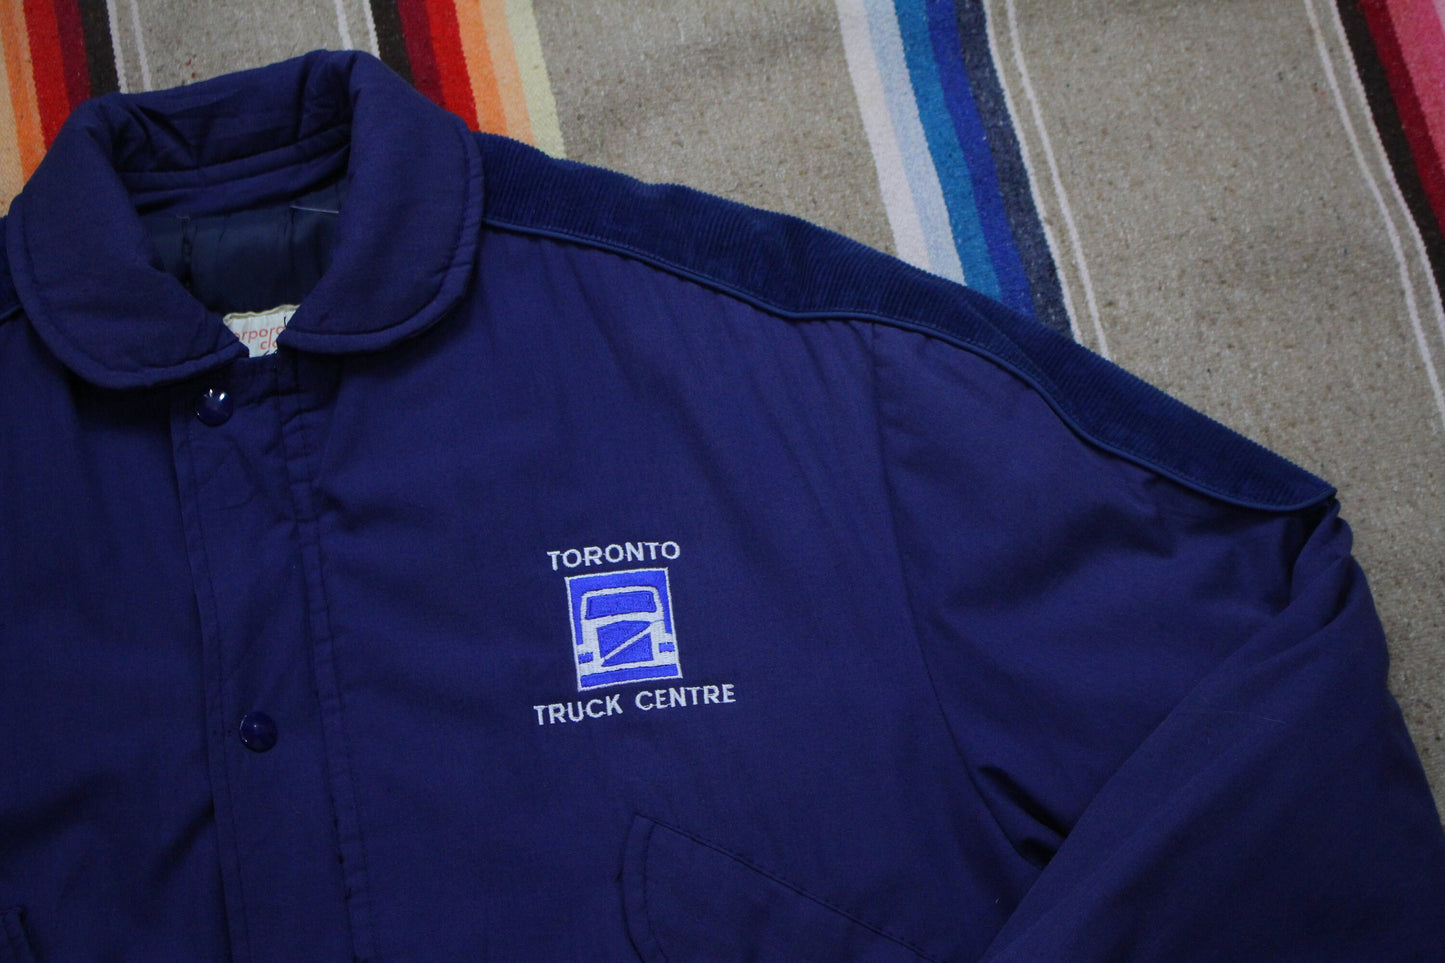 1990s Avon Sportswear Toronto Truck Centre Insulated Bomber Work Jacket Made in Canada Size M